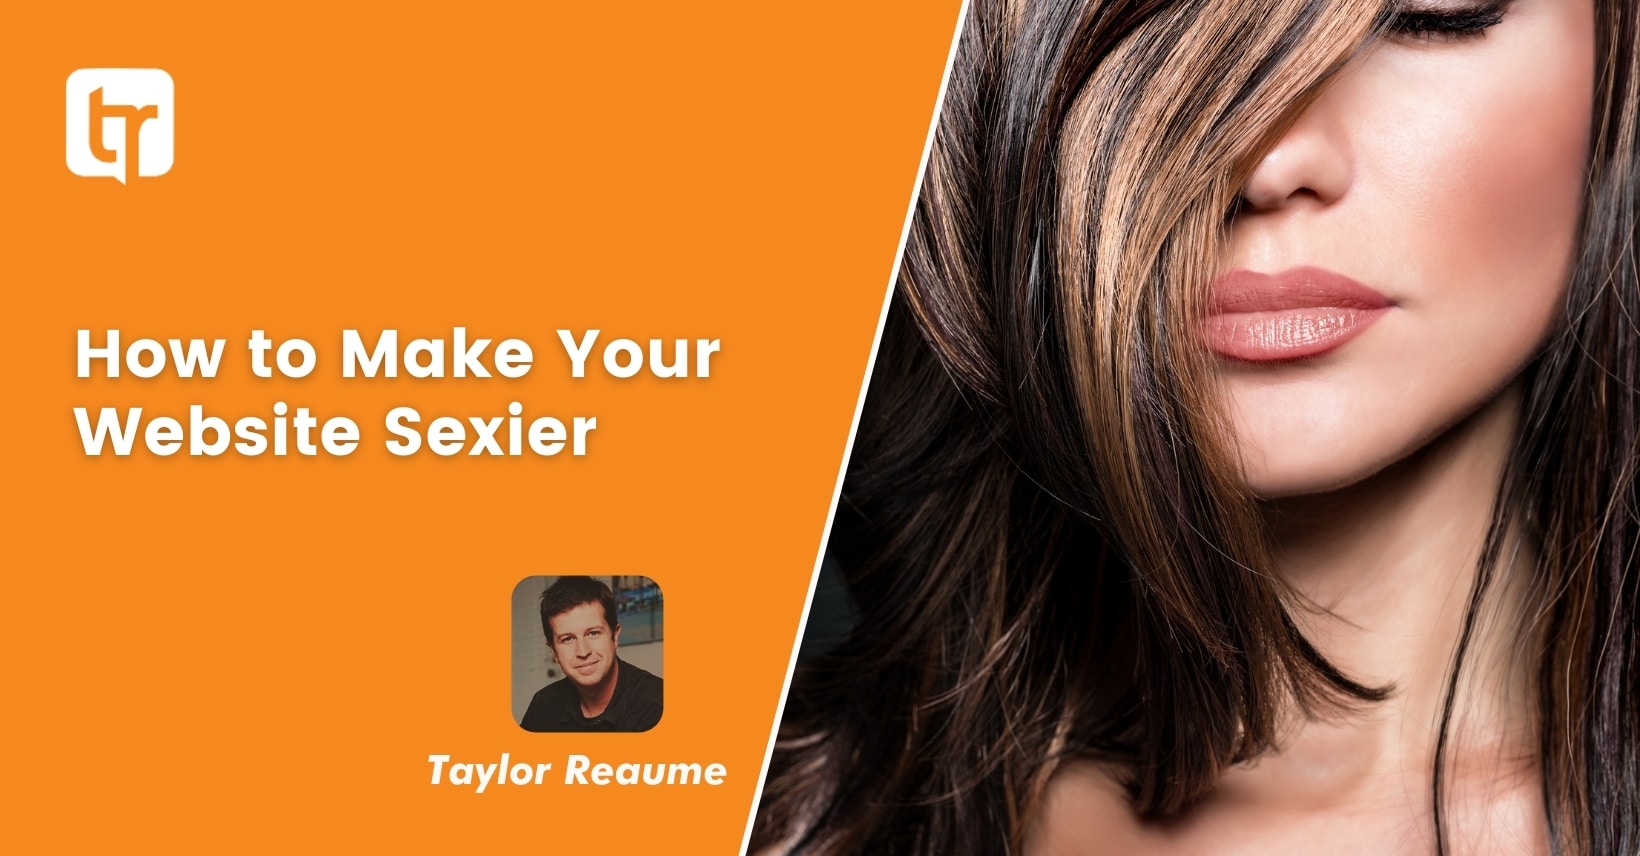 How To Make Your Website Sexier